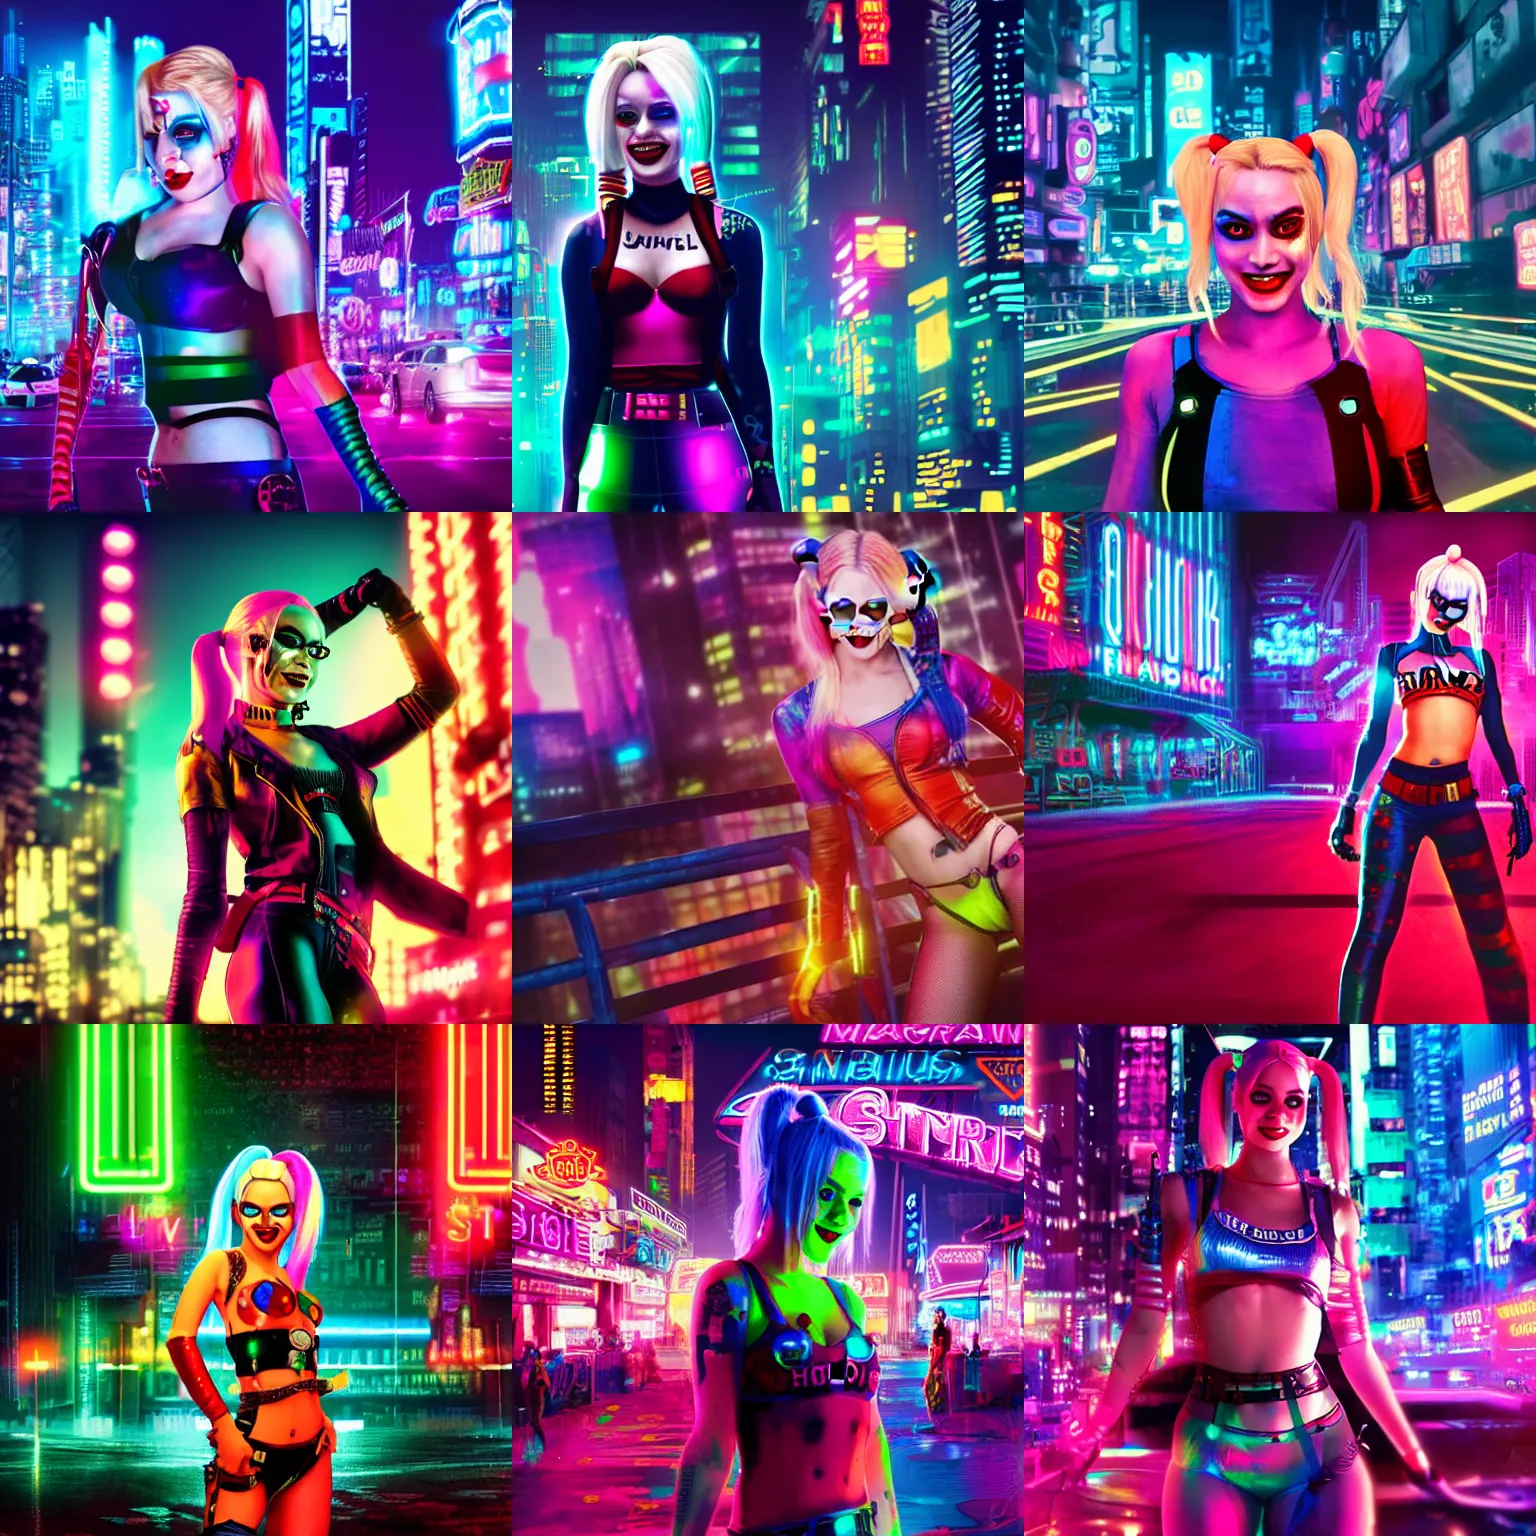 Prompt: harley quinn film still of her standing, smiling, cyberpunk setting, beautiful cityscape background, neon signs, vibrant colors, holograms, 4k, digital art